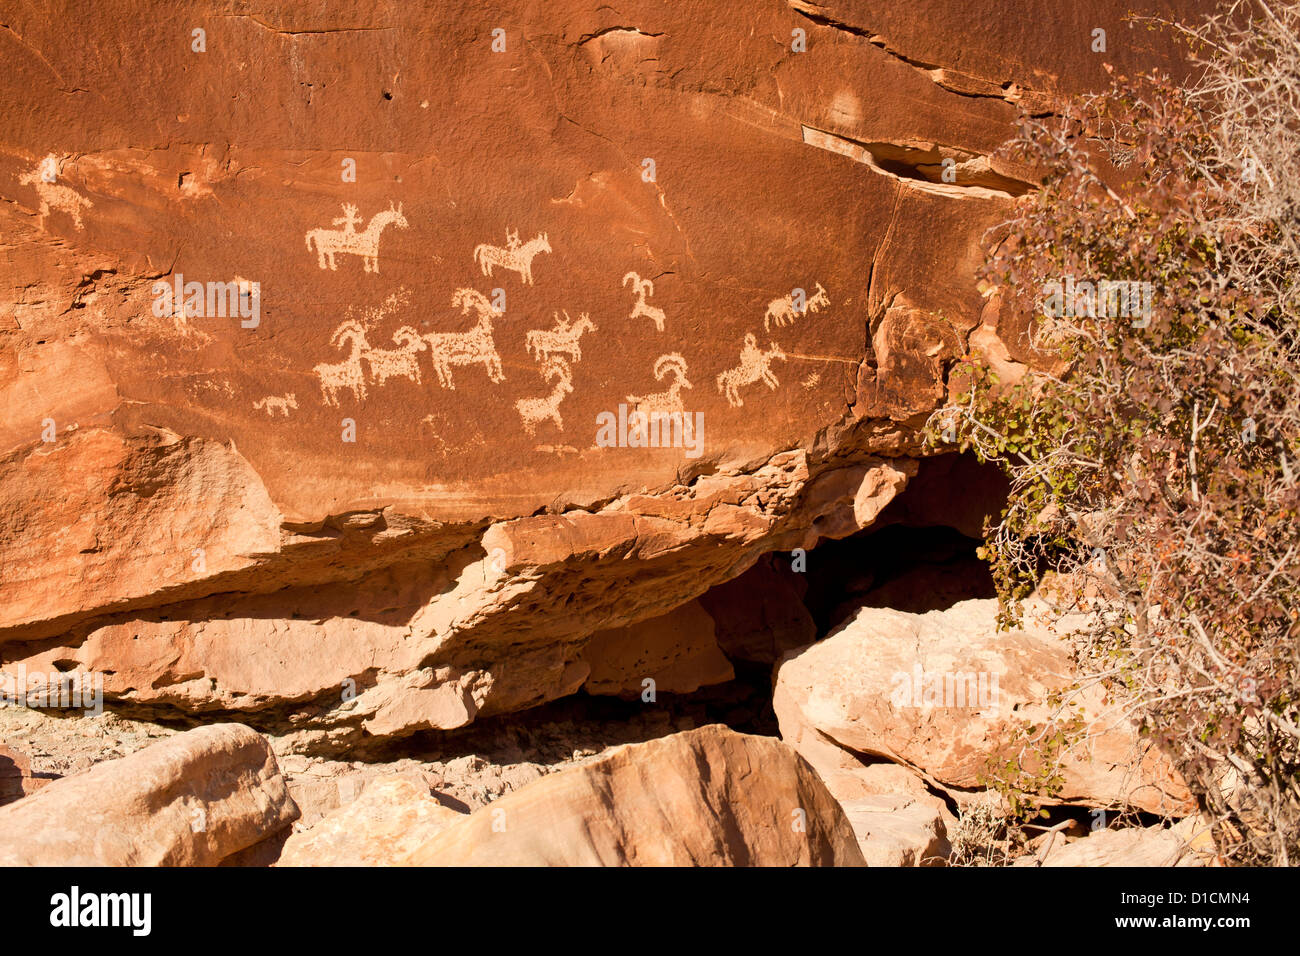 Ute indian Petroglyphs at Arches National Park just outside of Moab, Utah, United States of America, USA Stock Photo